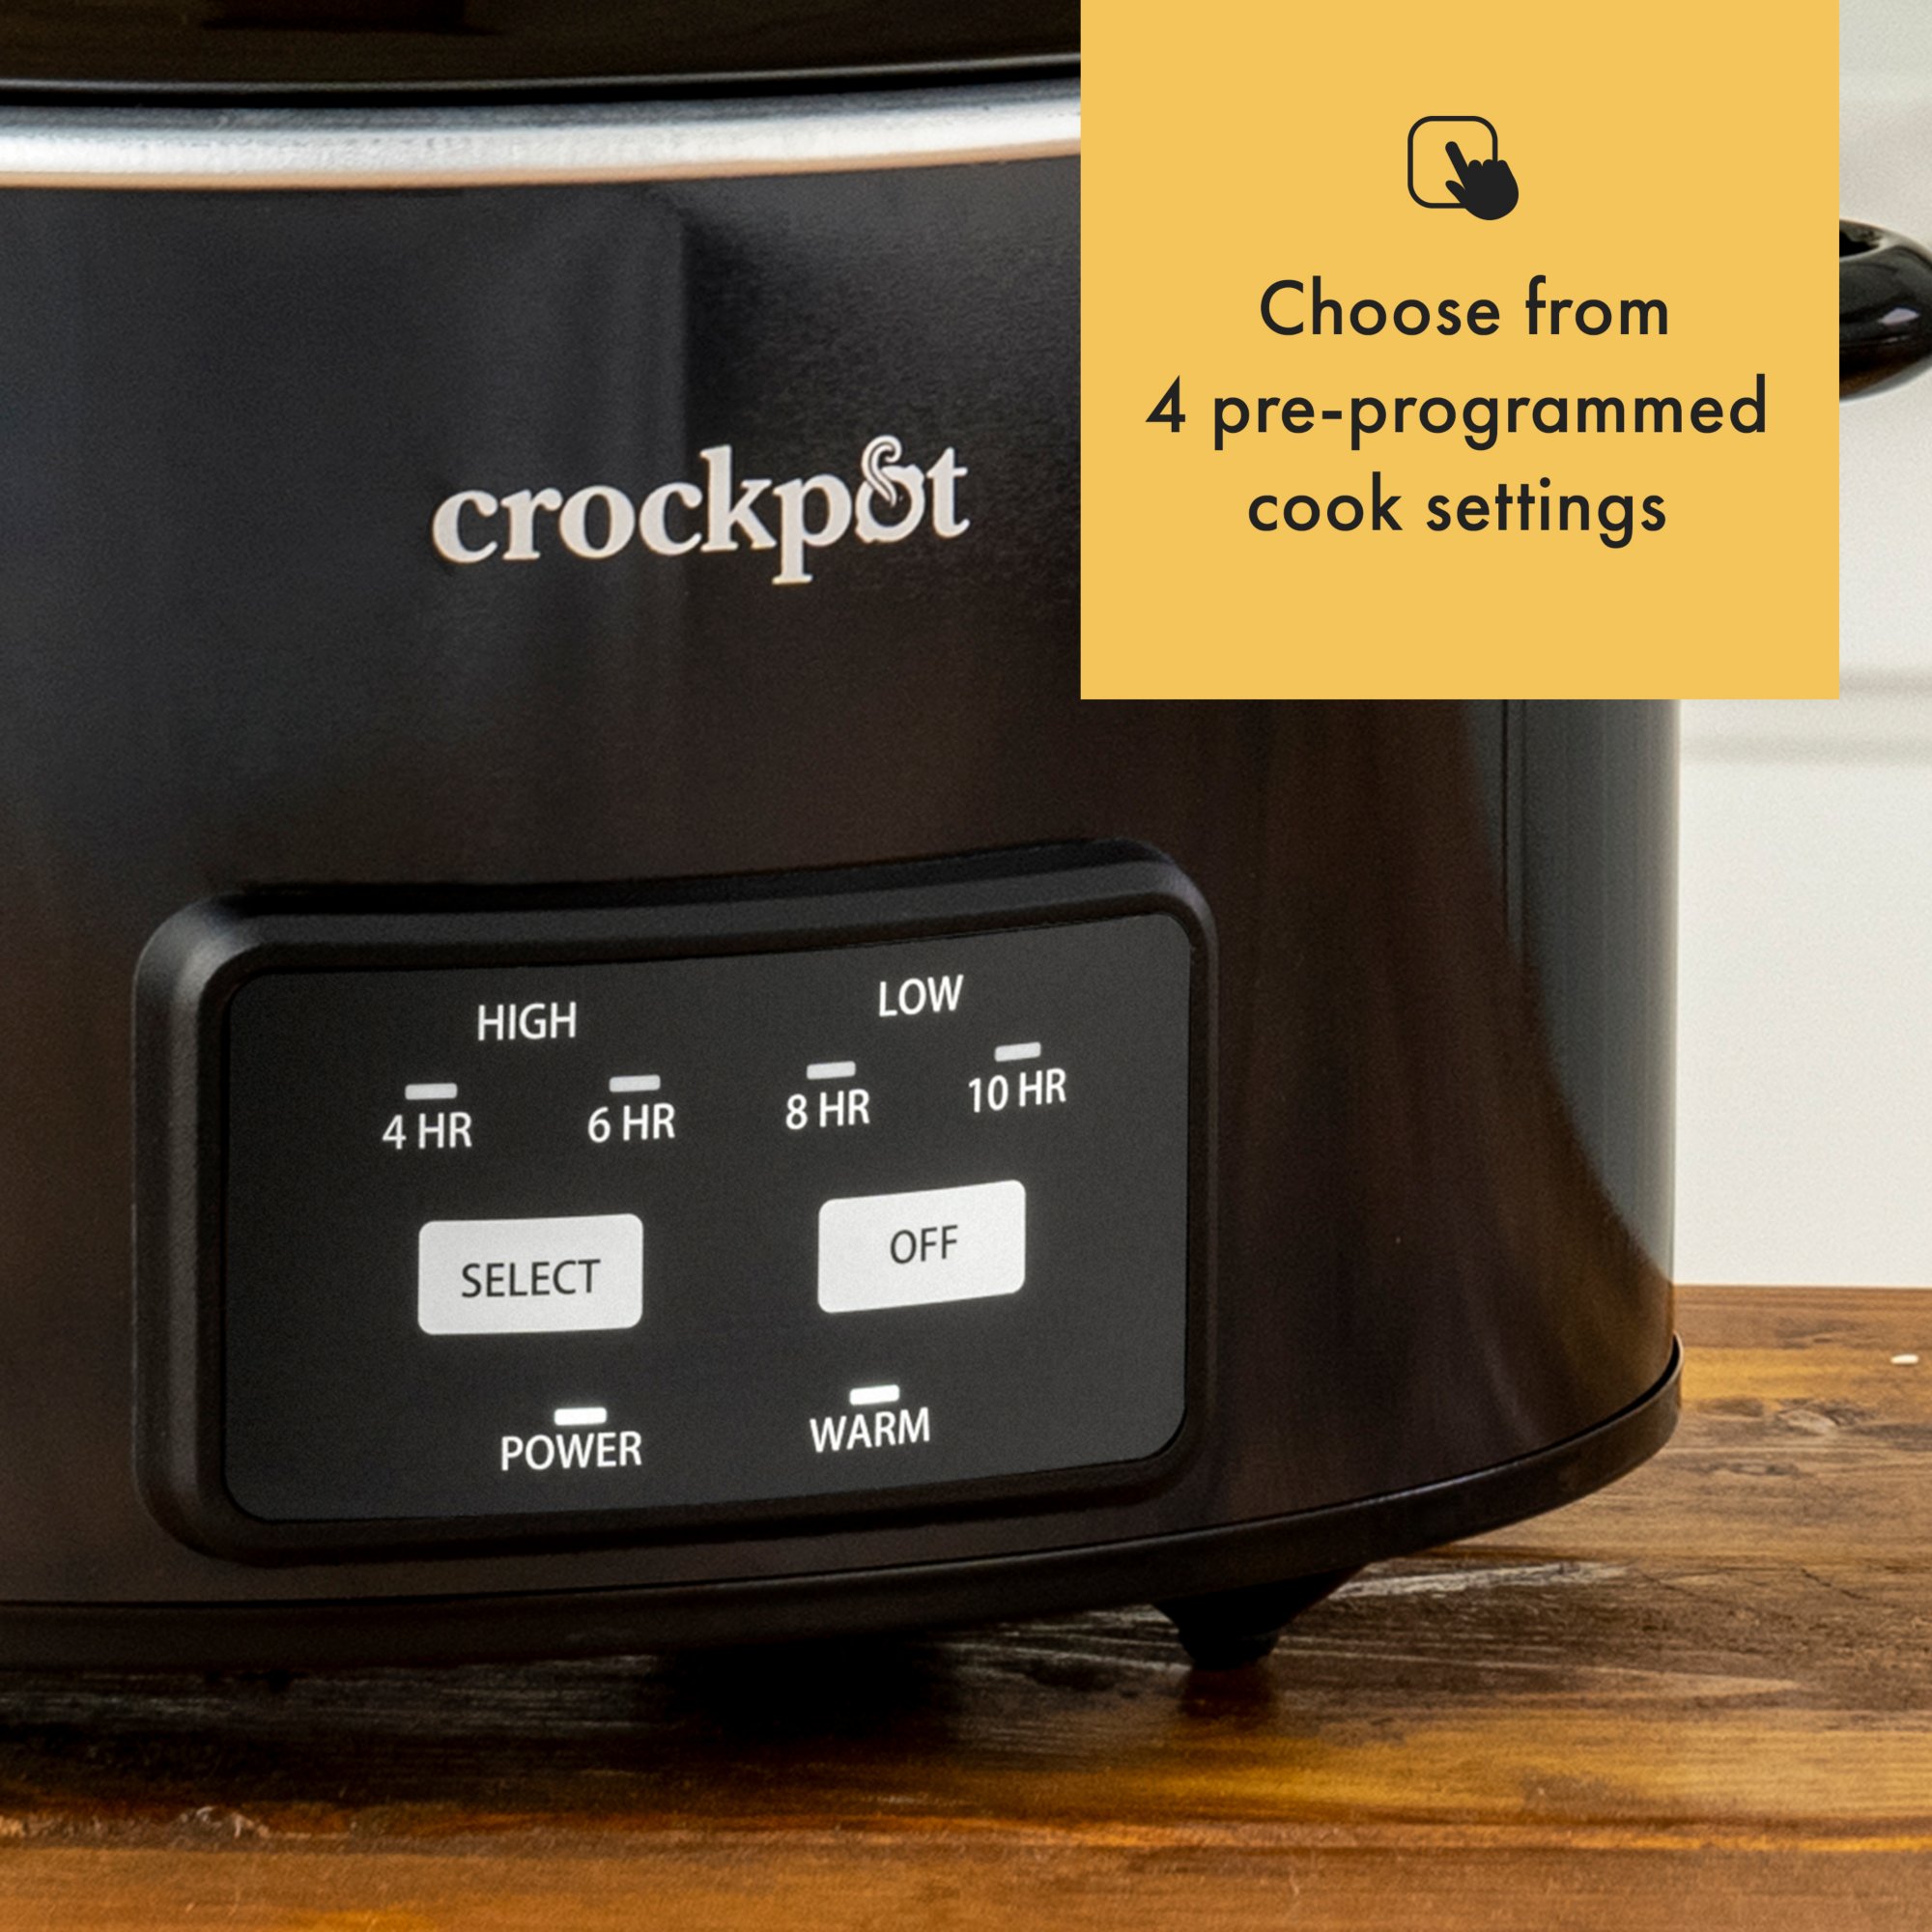 HOT Crock-Pot Clearance on Swing and Serve and Classic 6 Qt